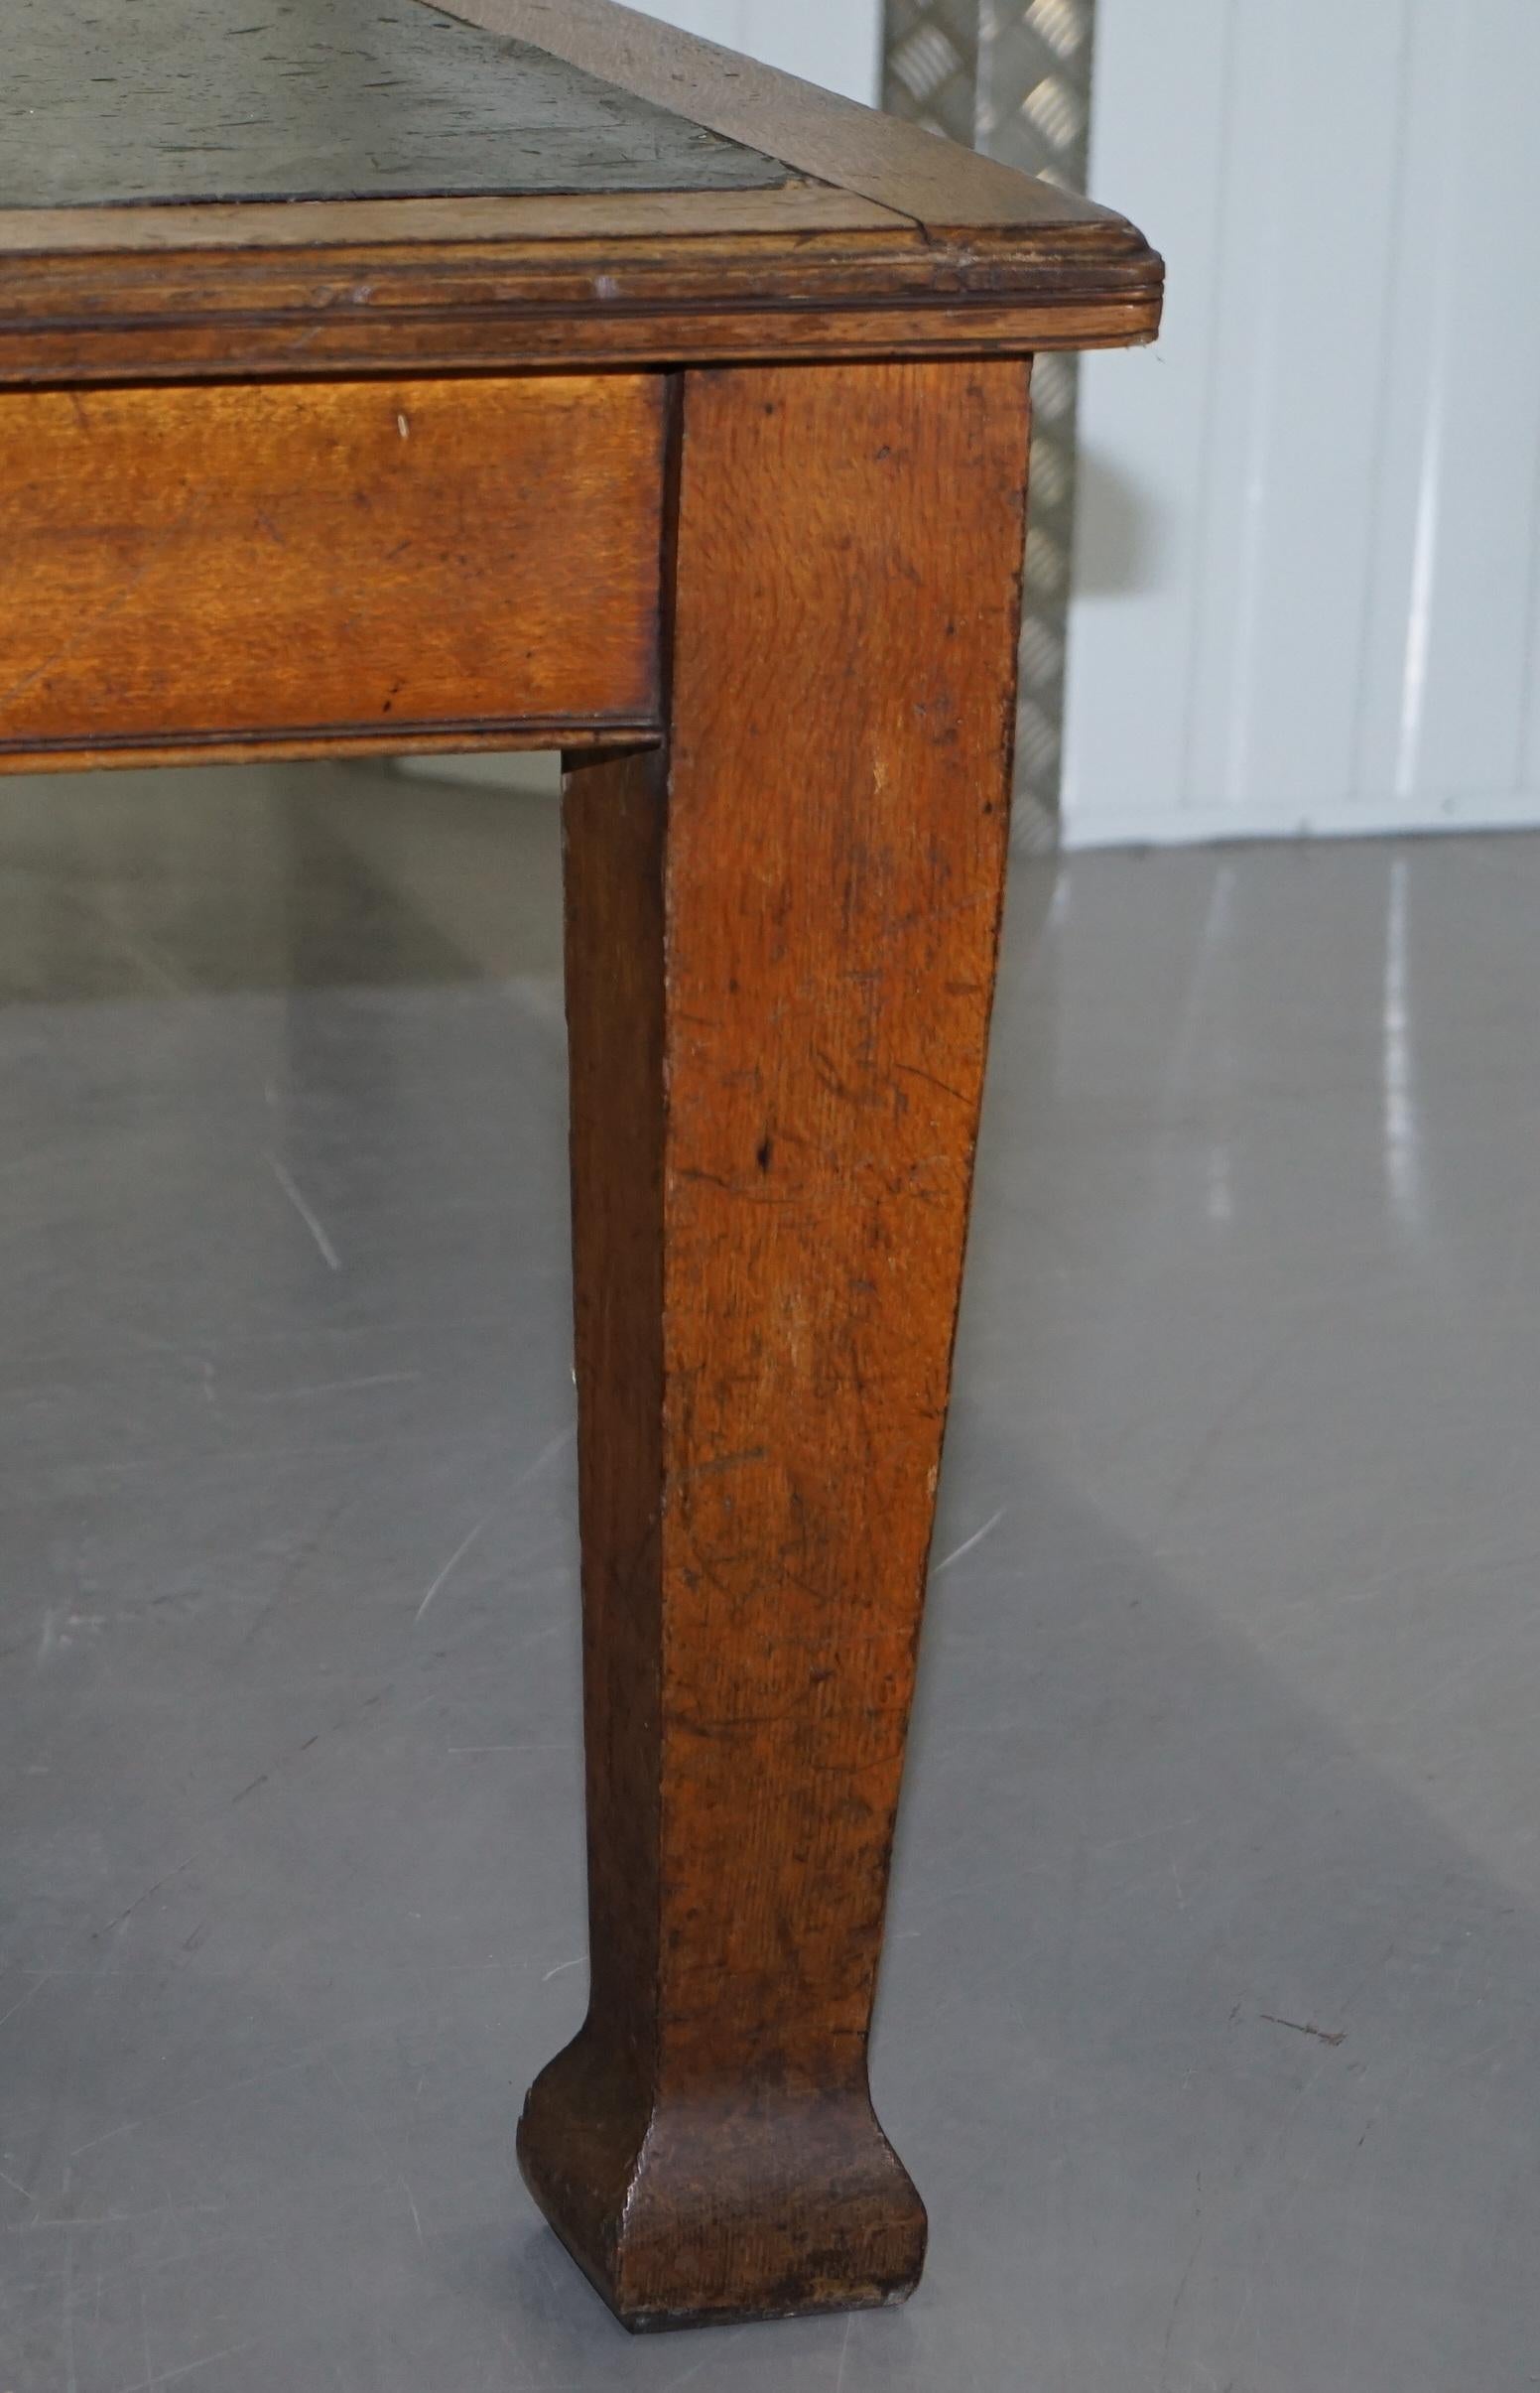 Huge circa 1900 Solid Oak Refectory Library Dining Table Lovely Thick Legs 9